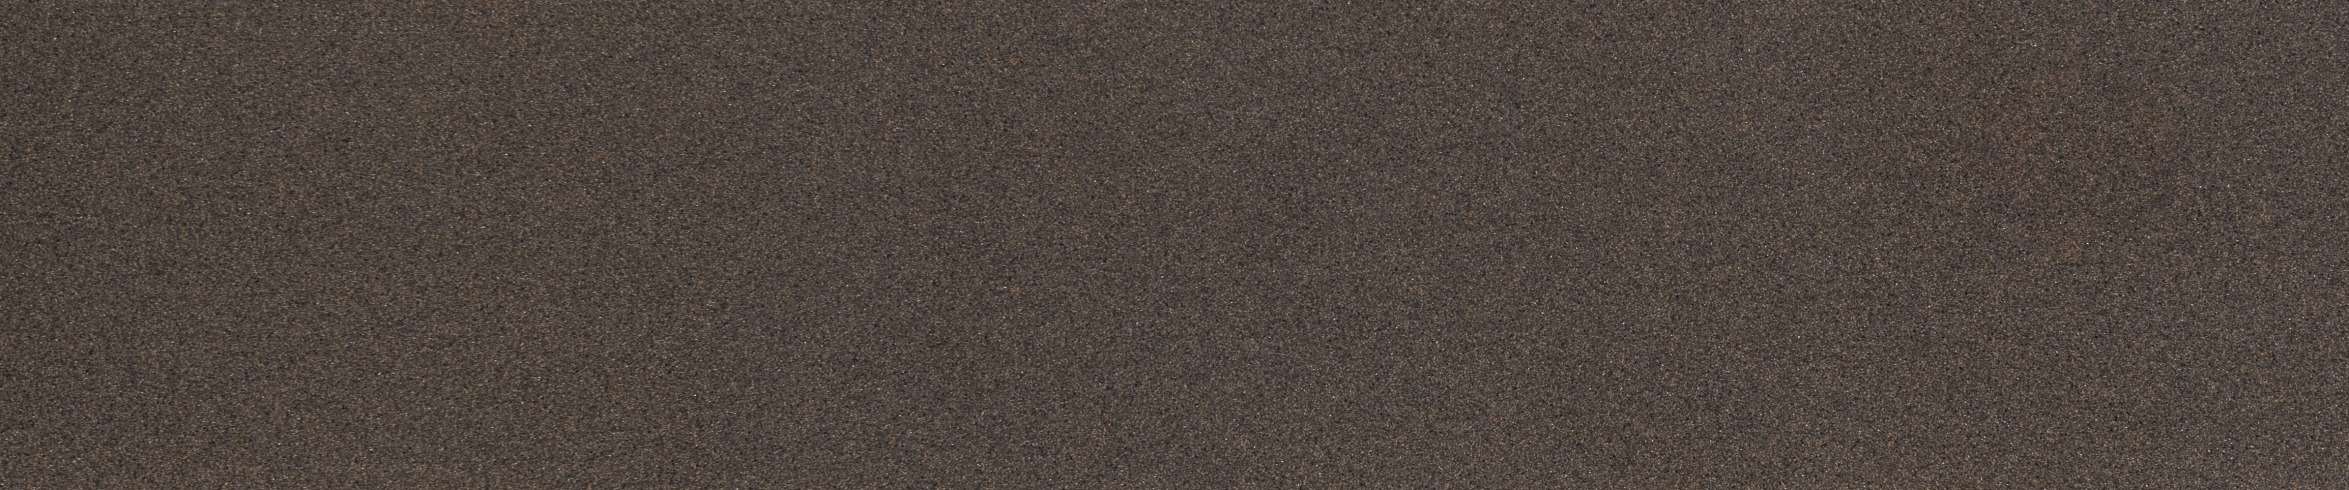 Hazelnut by Hanex Solid Surfaces full sheet